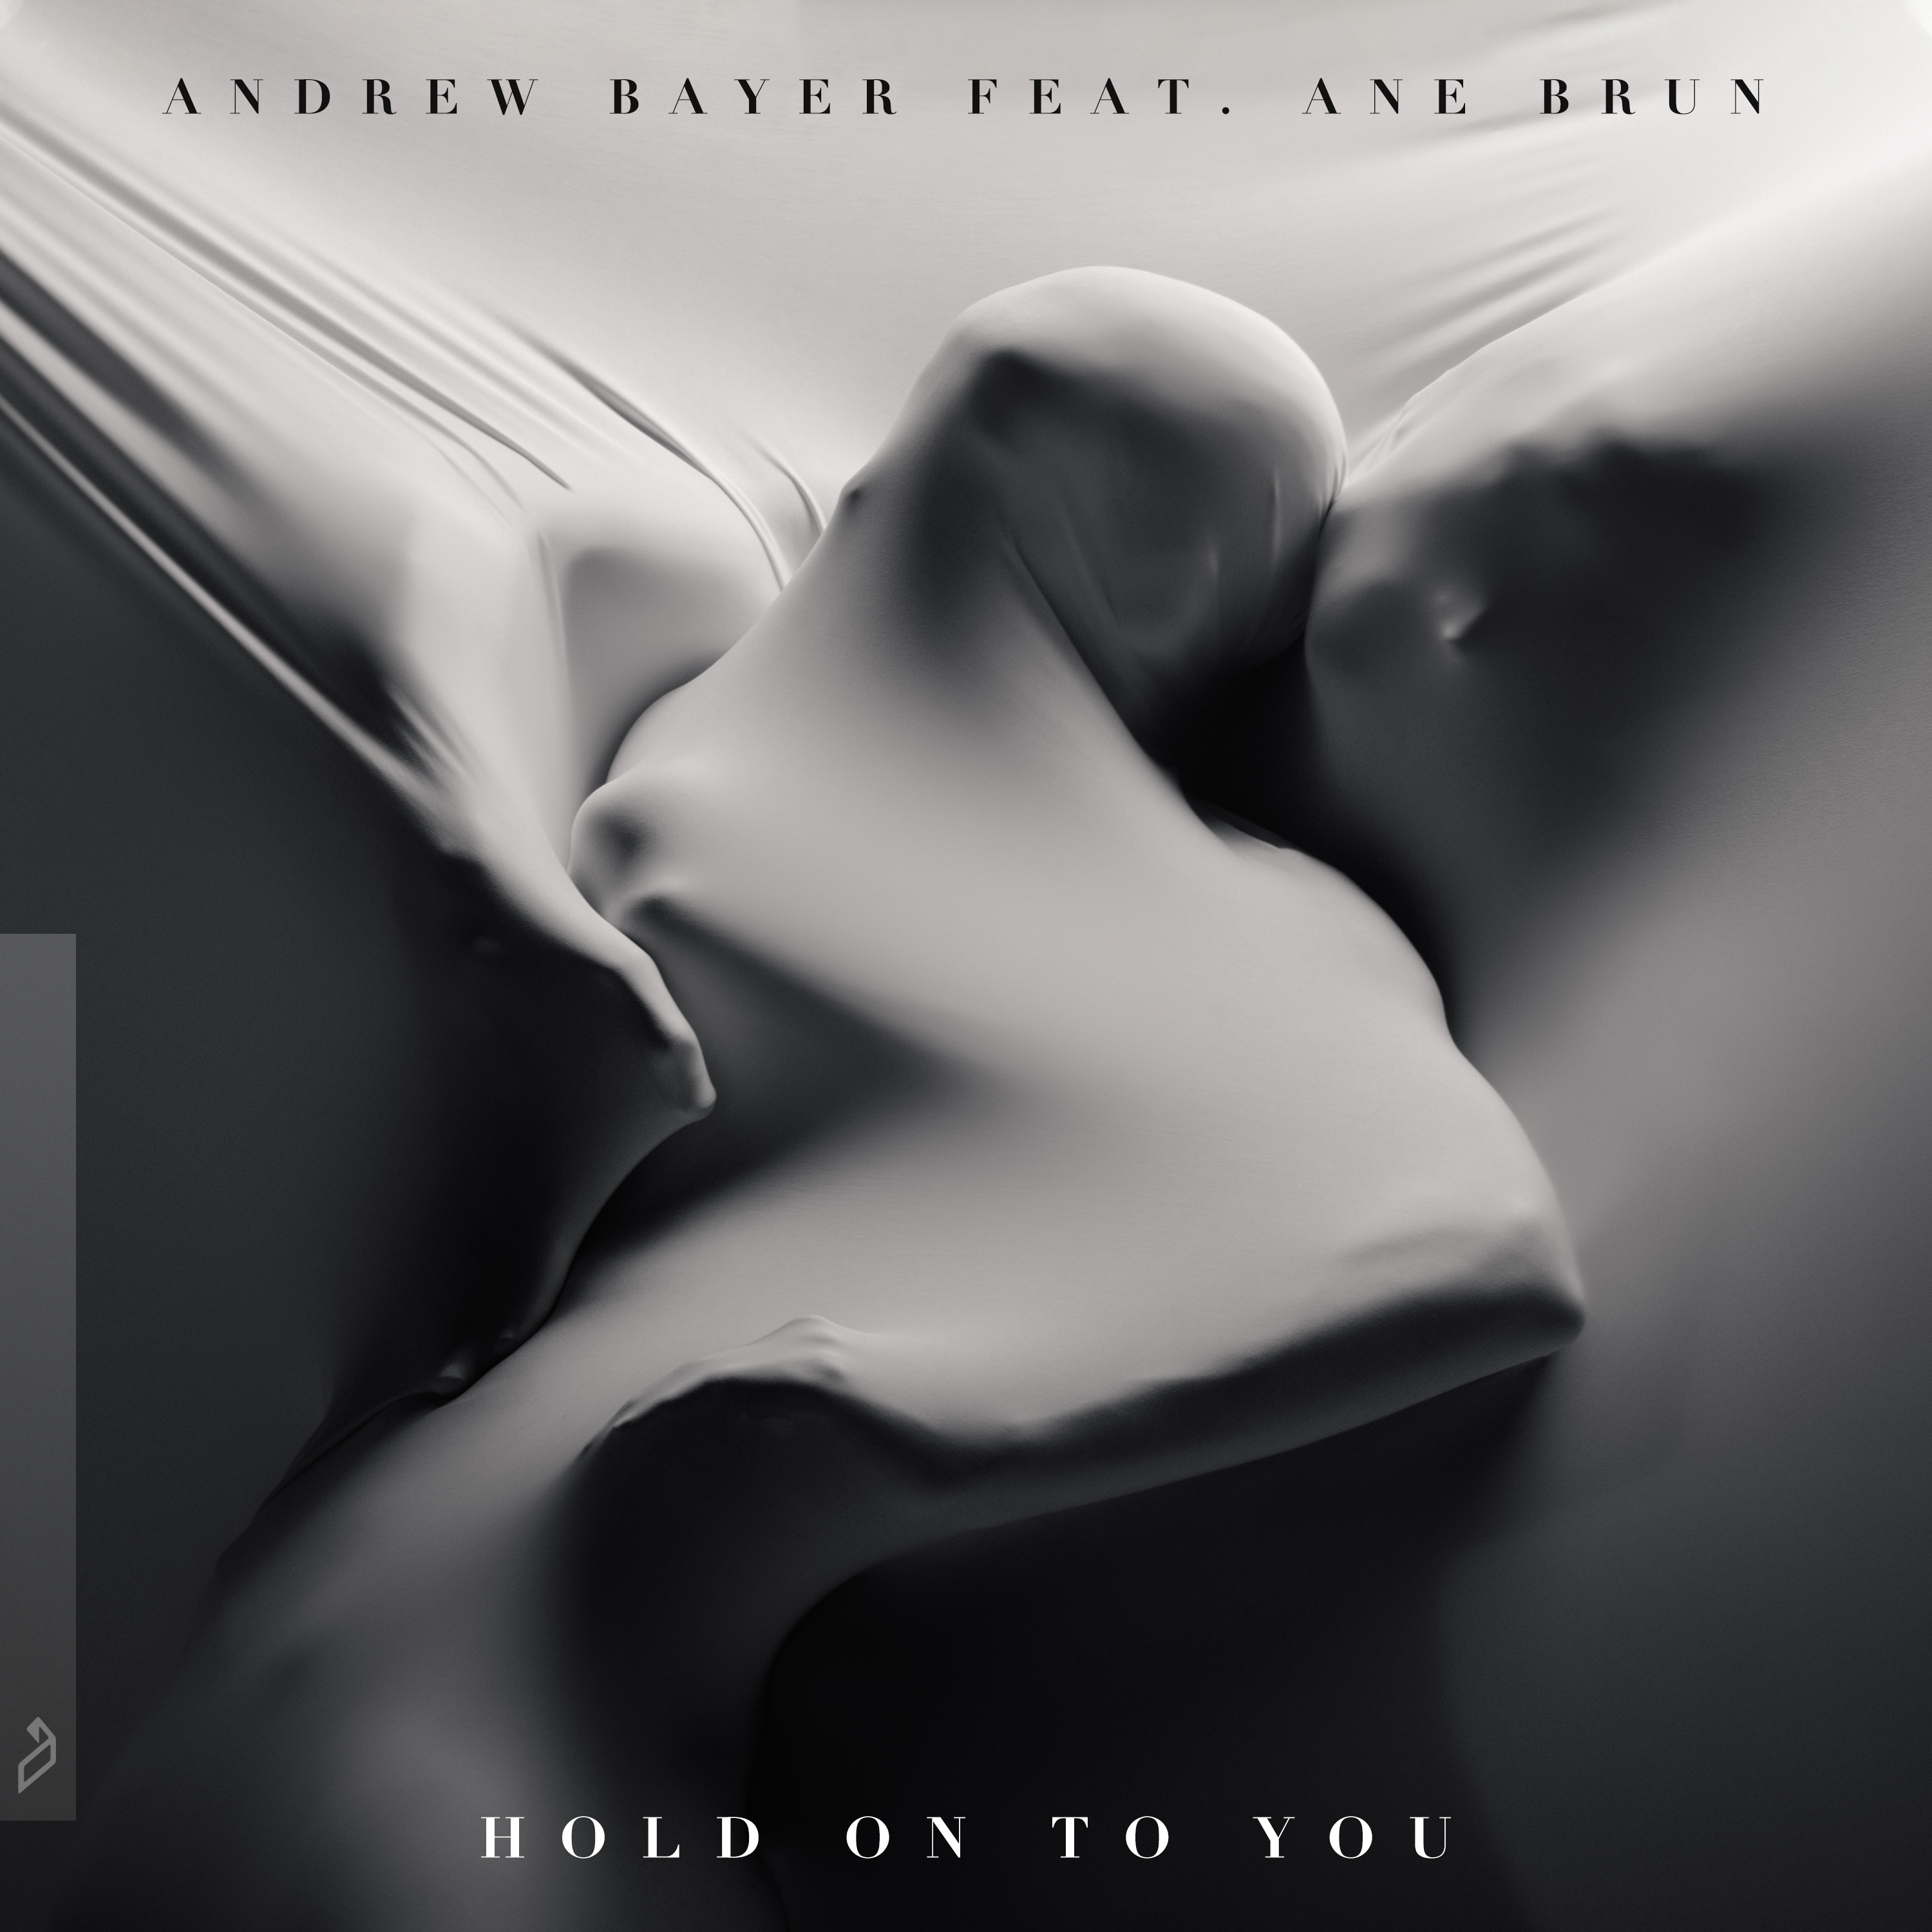 Andrew Bayer ft. featuring Ane Brun Hold On To You cover artwork